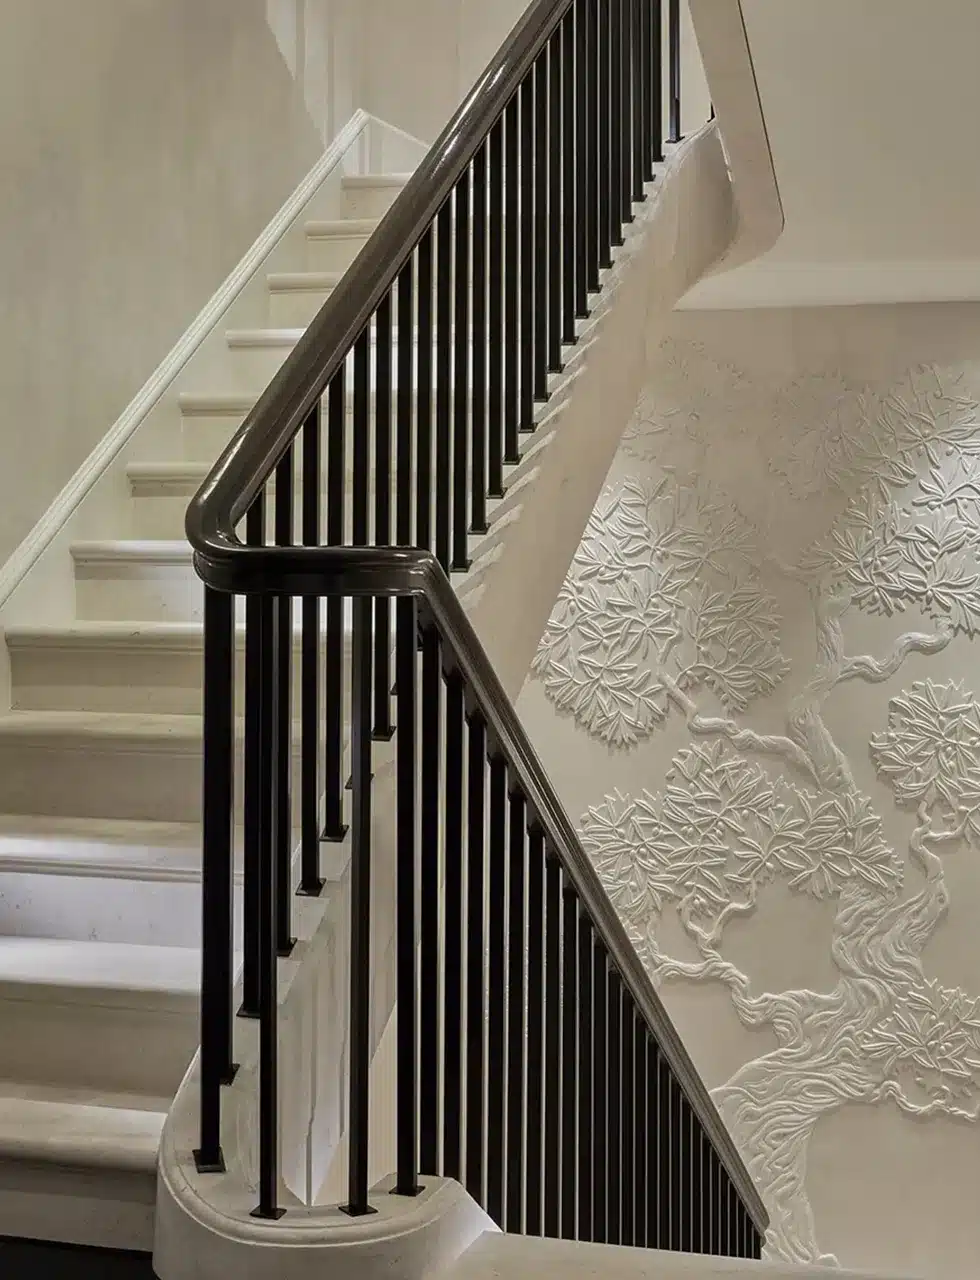 A beautiful staircase in one of interior designer katharine pooleys projects